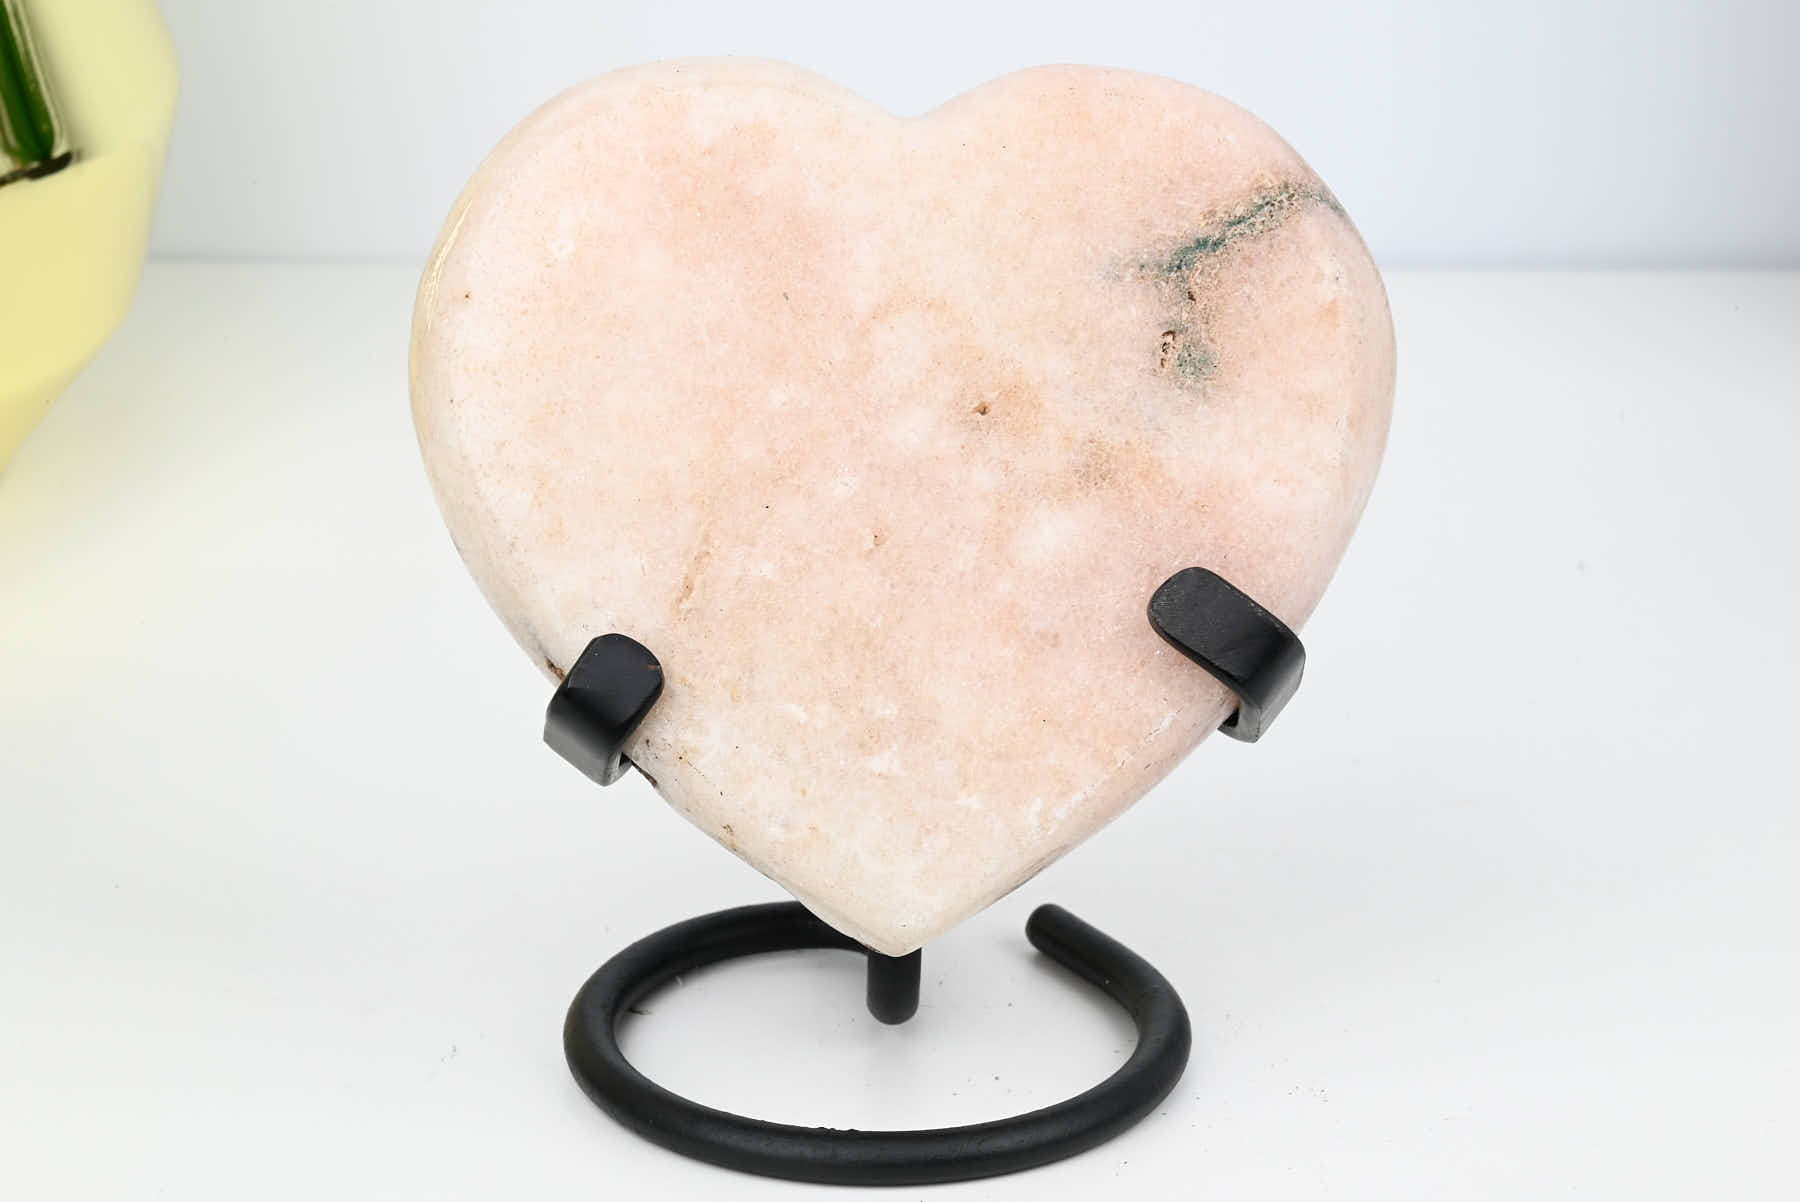 Extra Quality Pink Amethyst Heart - 0.84kg, 13cm high - #HTPINK-34027